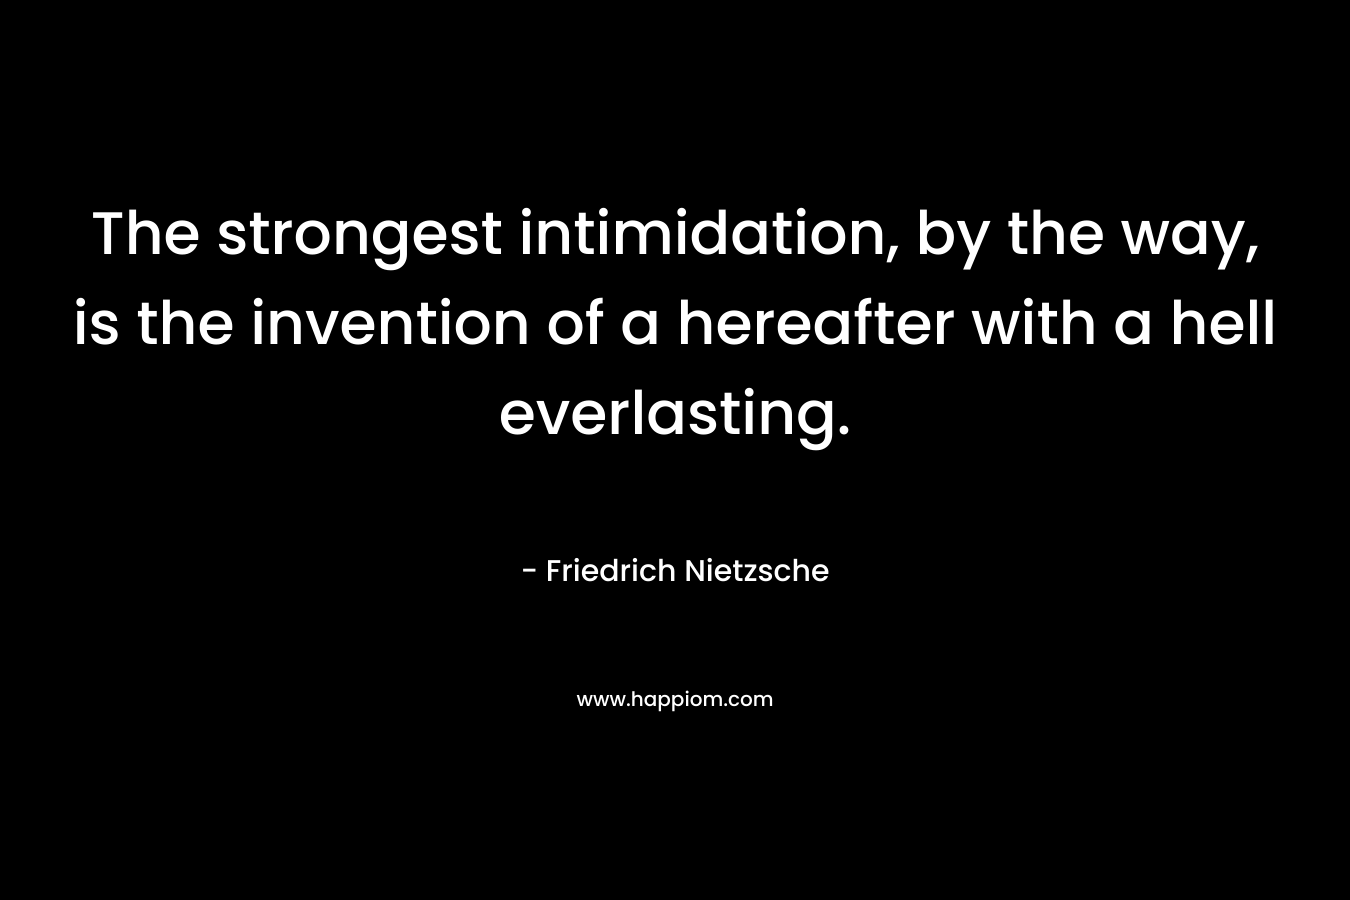 The strongest intimidation, by the way, is the invention of a hereafter with a hell everlasting. – Friedrich Nietzsche